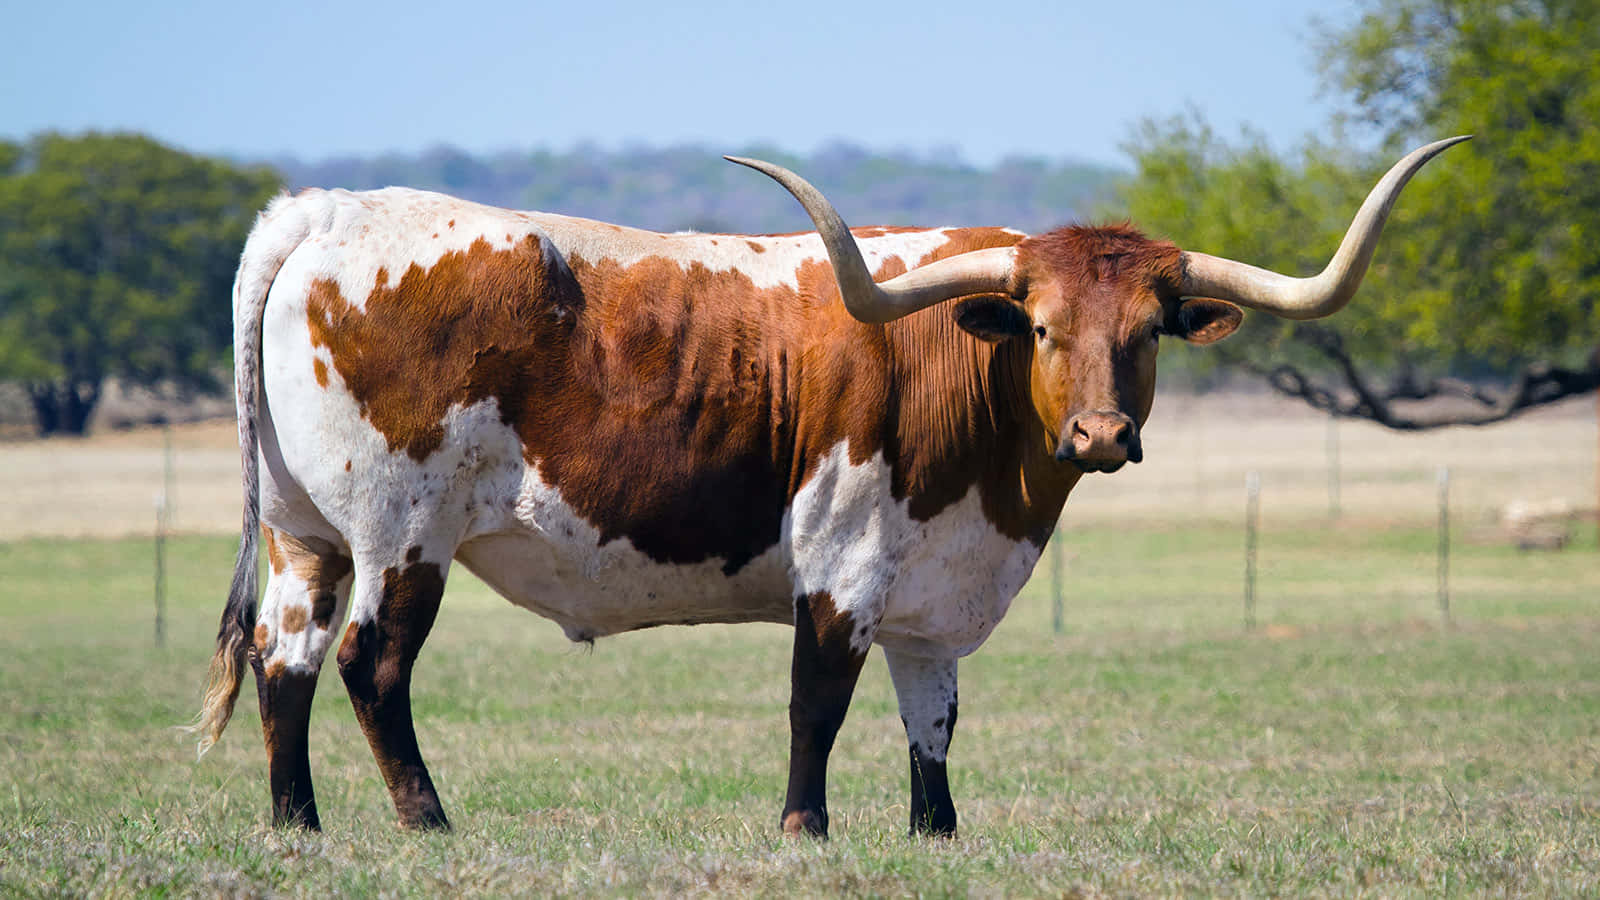 A Cow With Long Horns